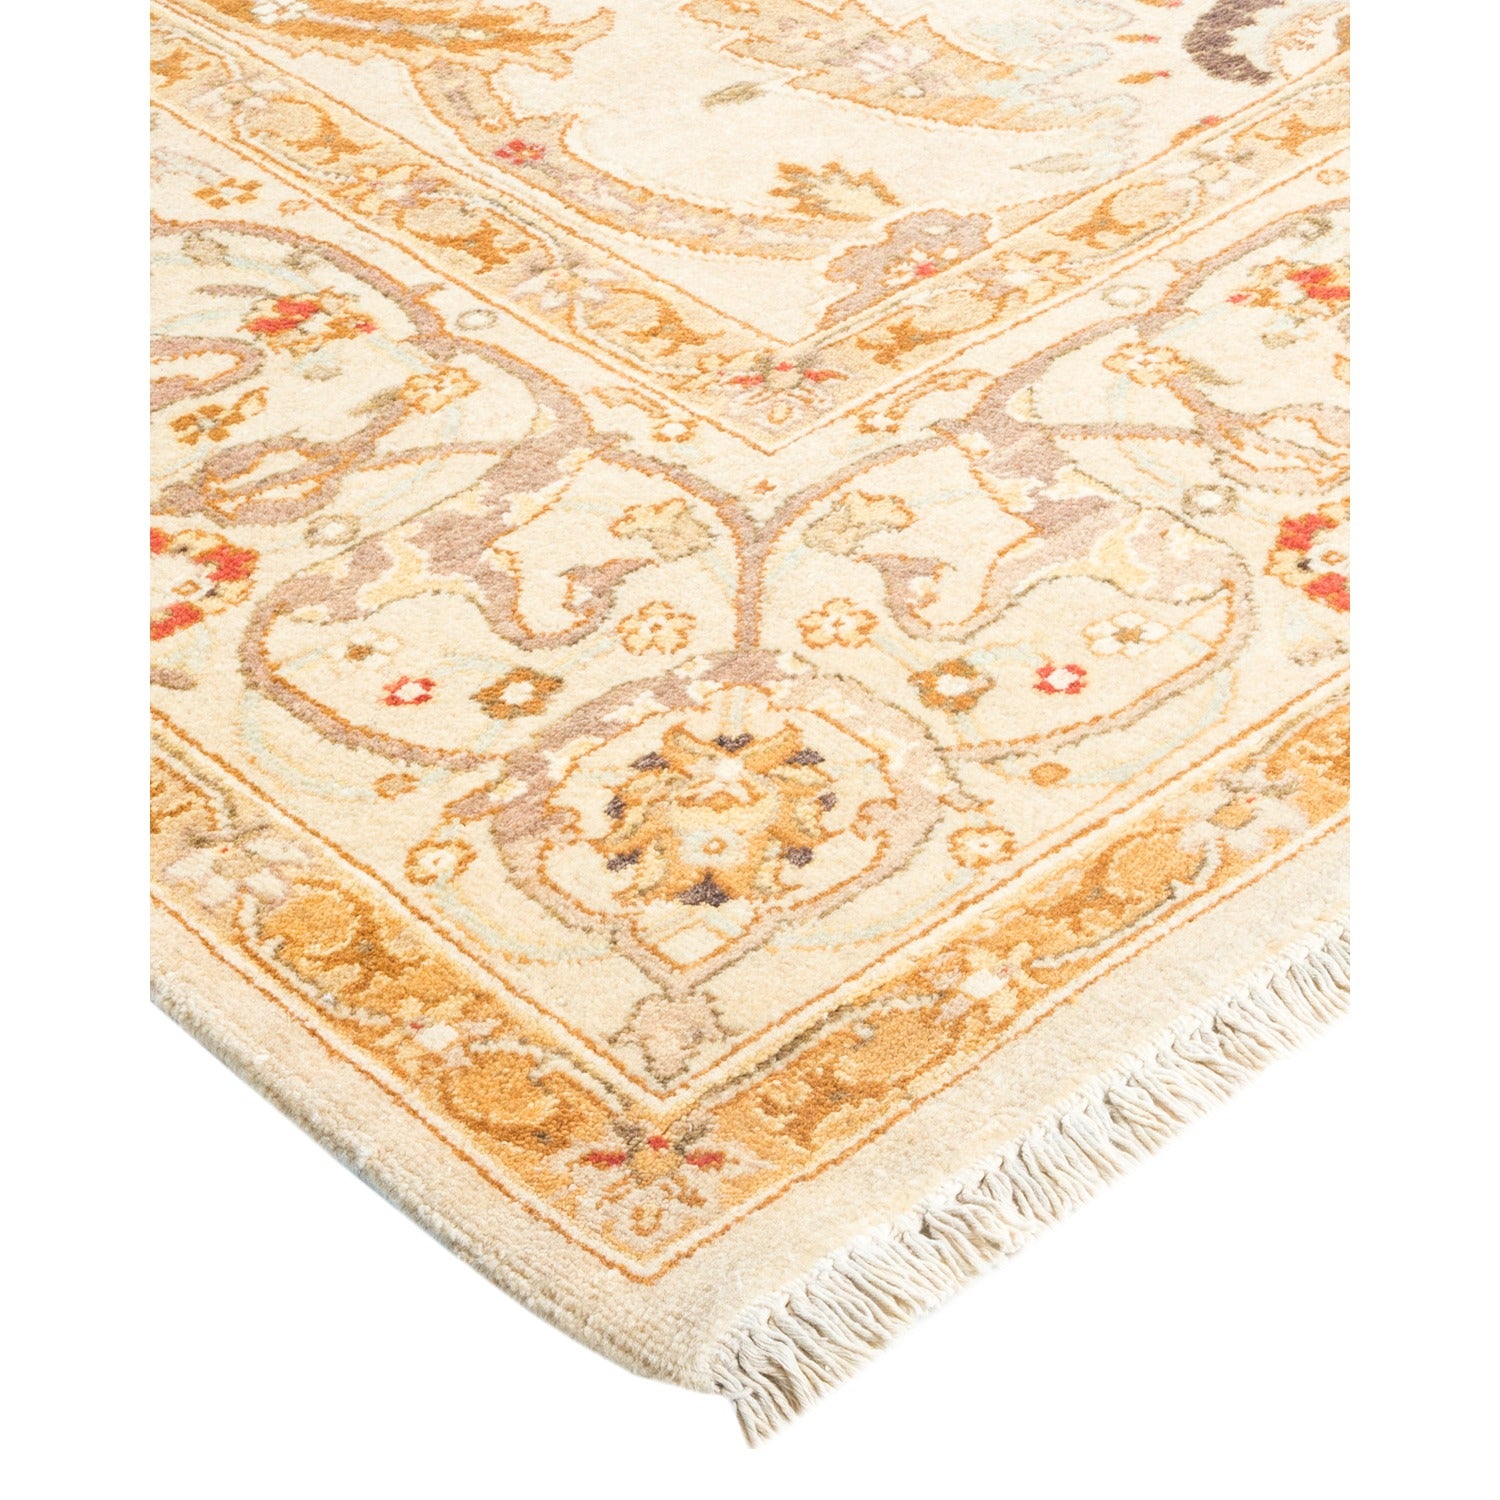 Intricate handmade ornamental rug with floral and abstract motifs.